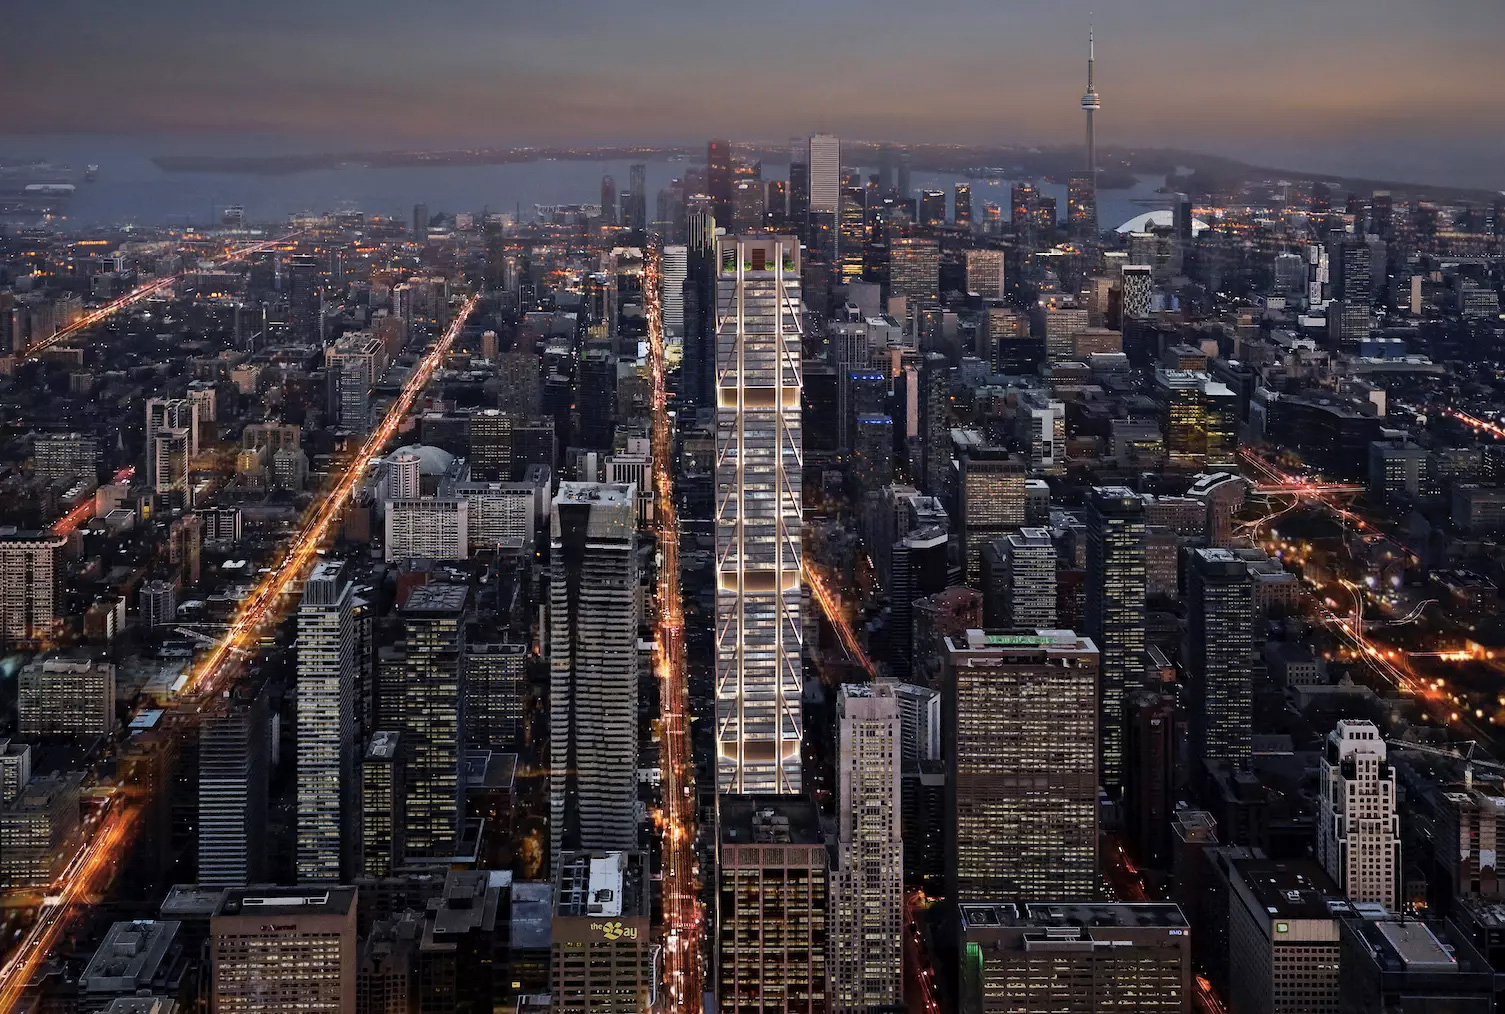 Aerial view of Toronto at dusk - The One